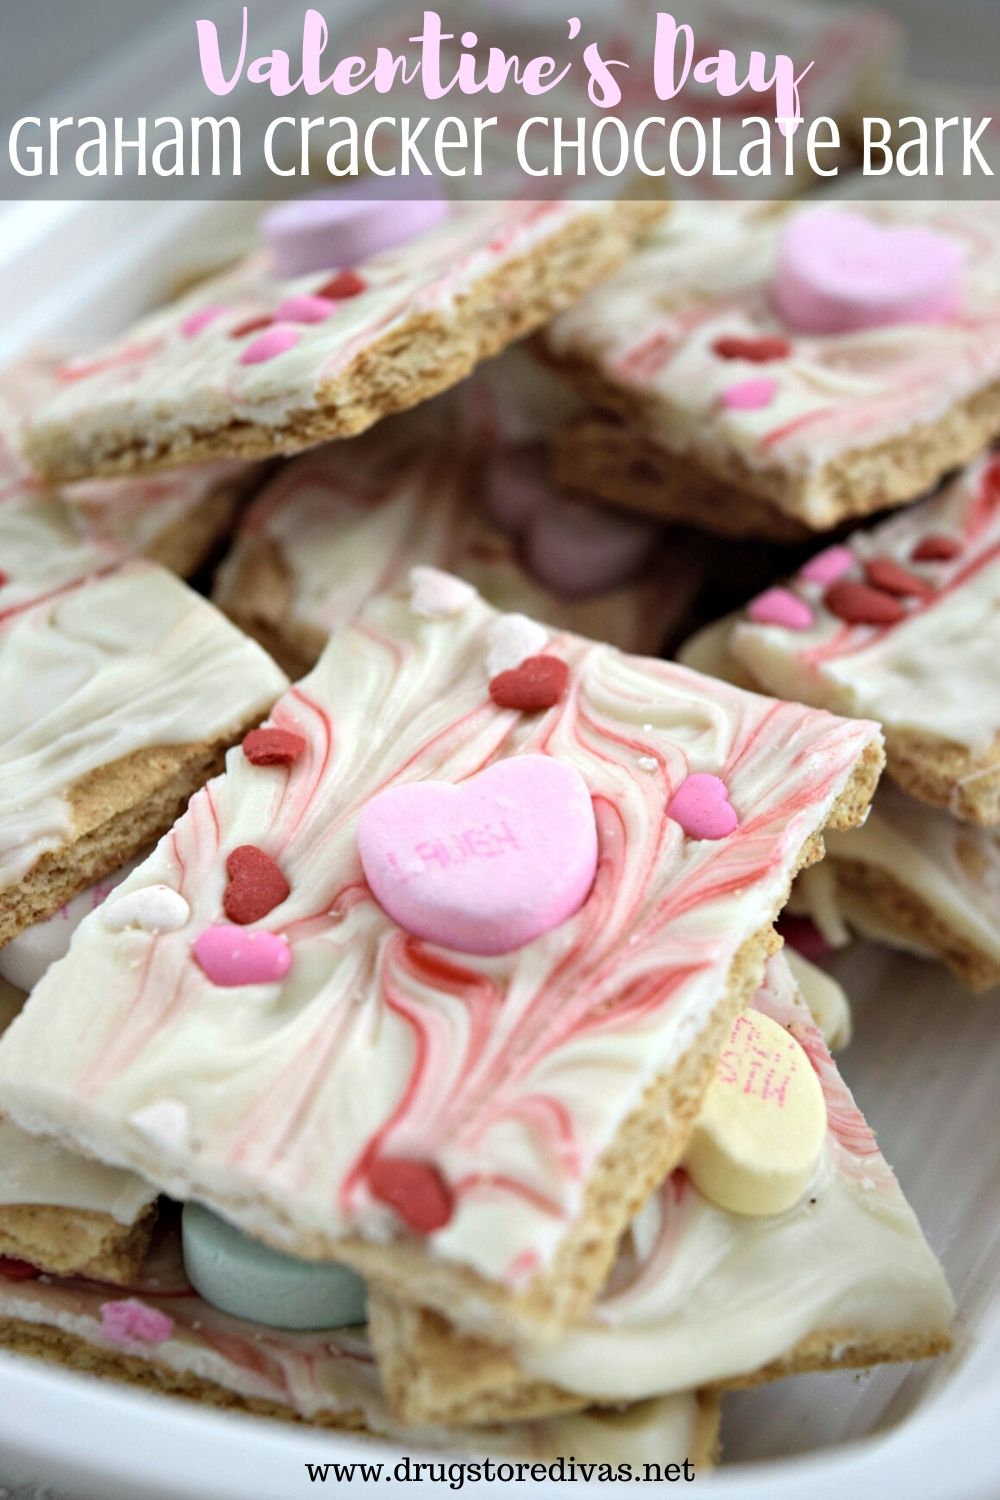 Graham crackers with chocolate and conversation hearts and the words "Valentine's Day Graham Cracker Chocolate Bark" digitally written on top.